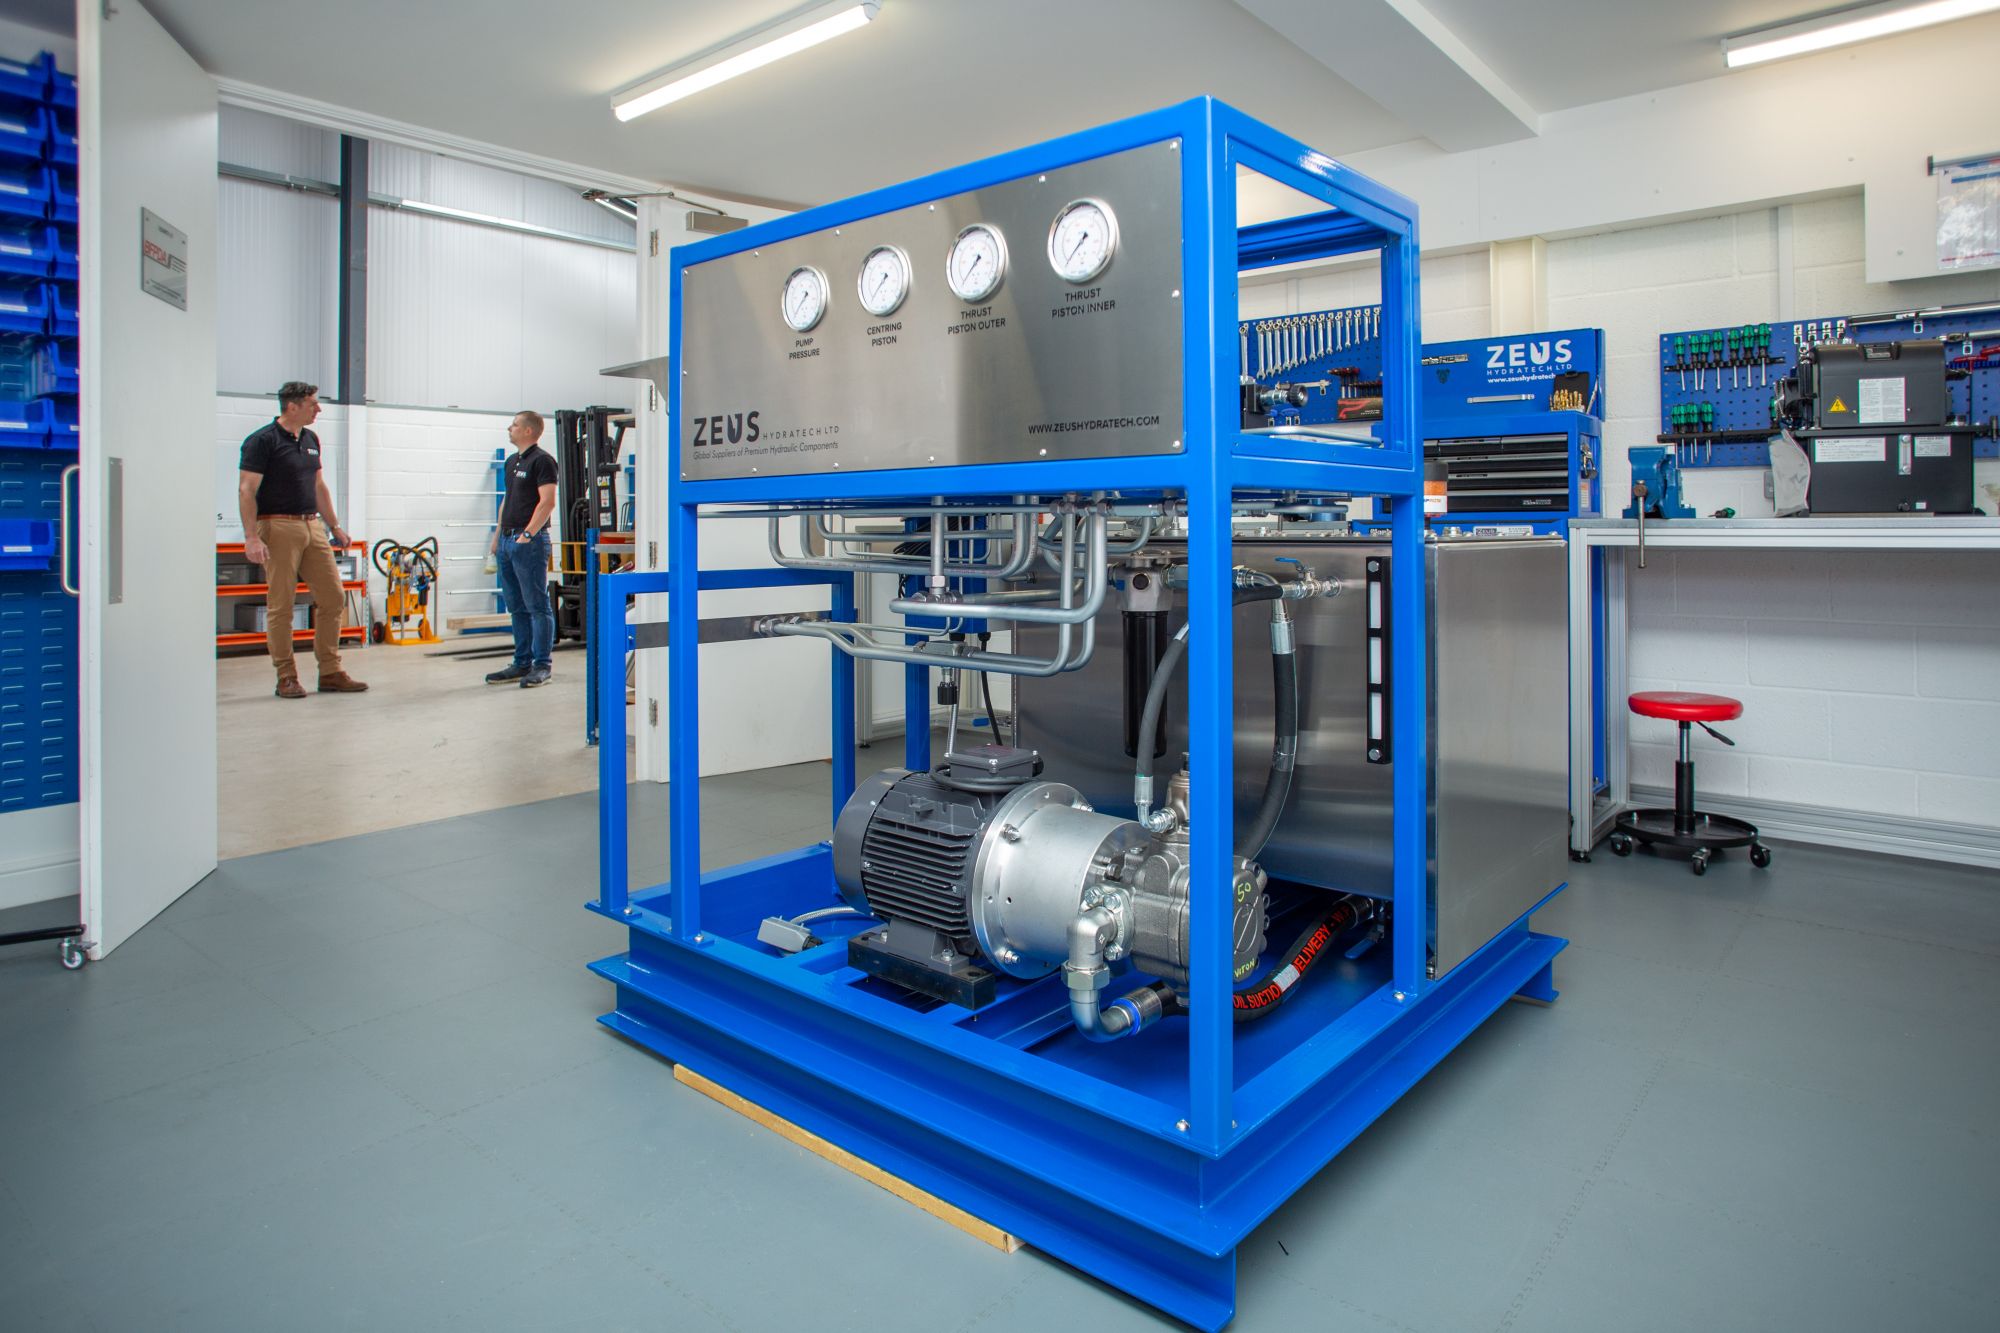 This is an image of a Bespoke Hydraulic Power Unit, Manufactured by Zeus Hydratech